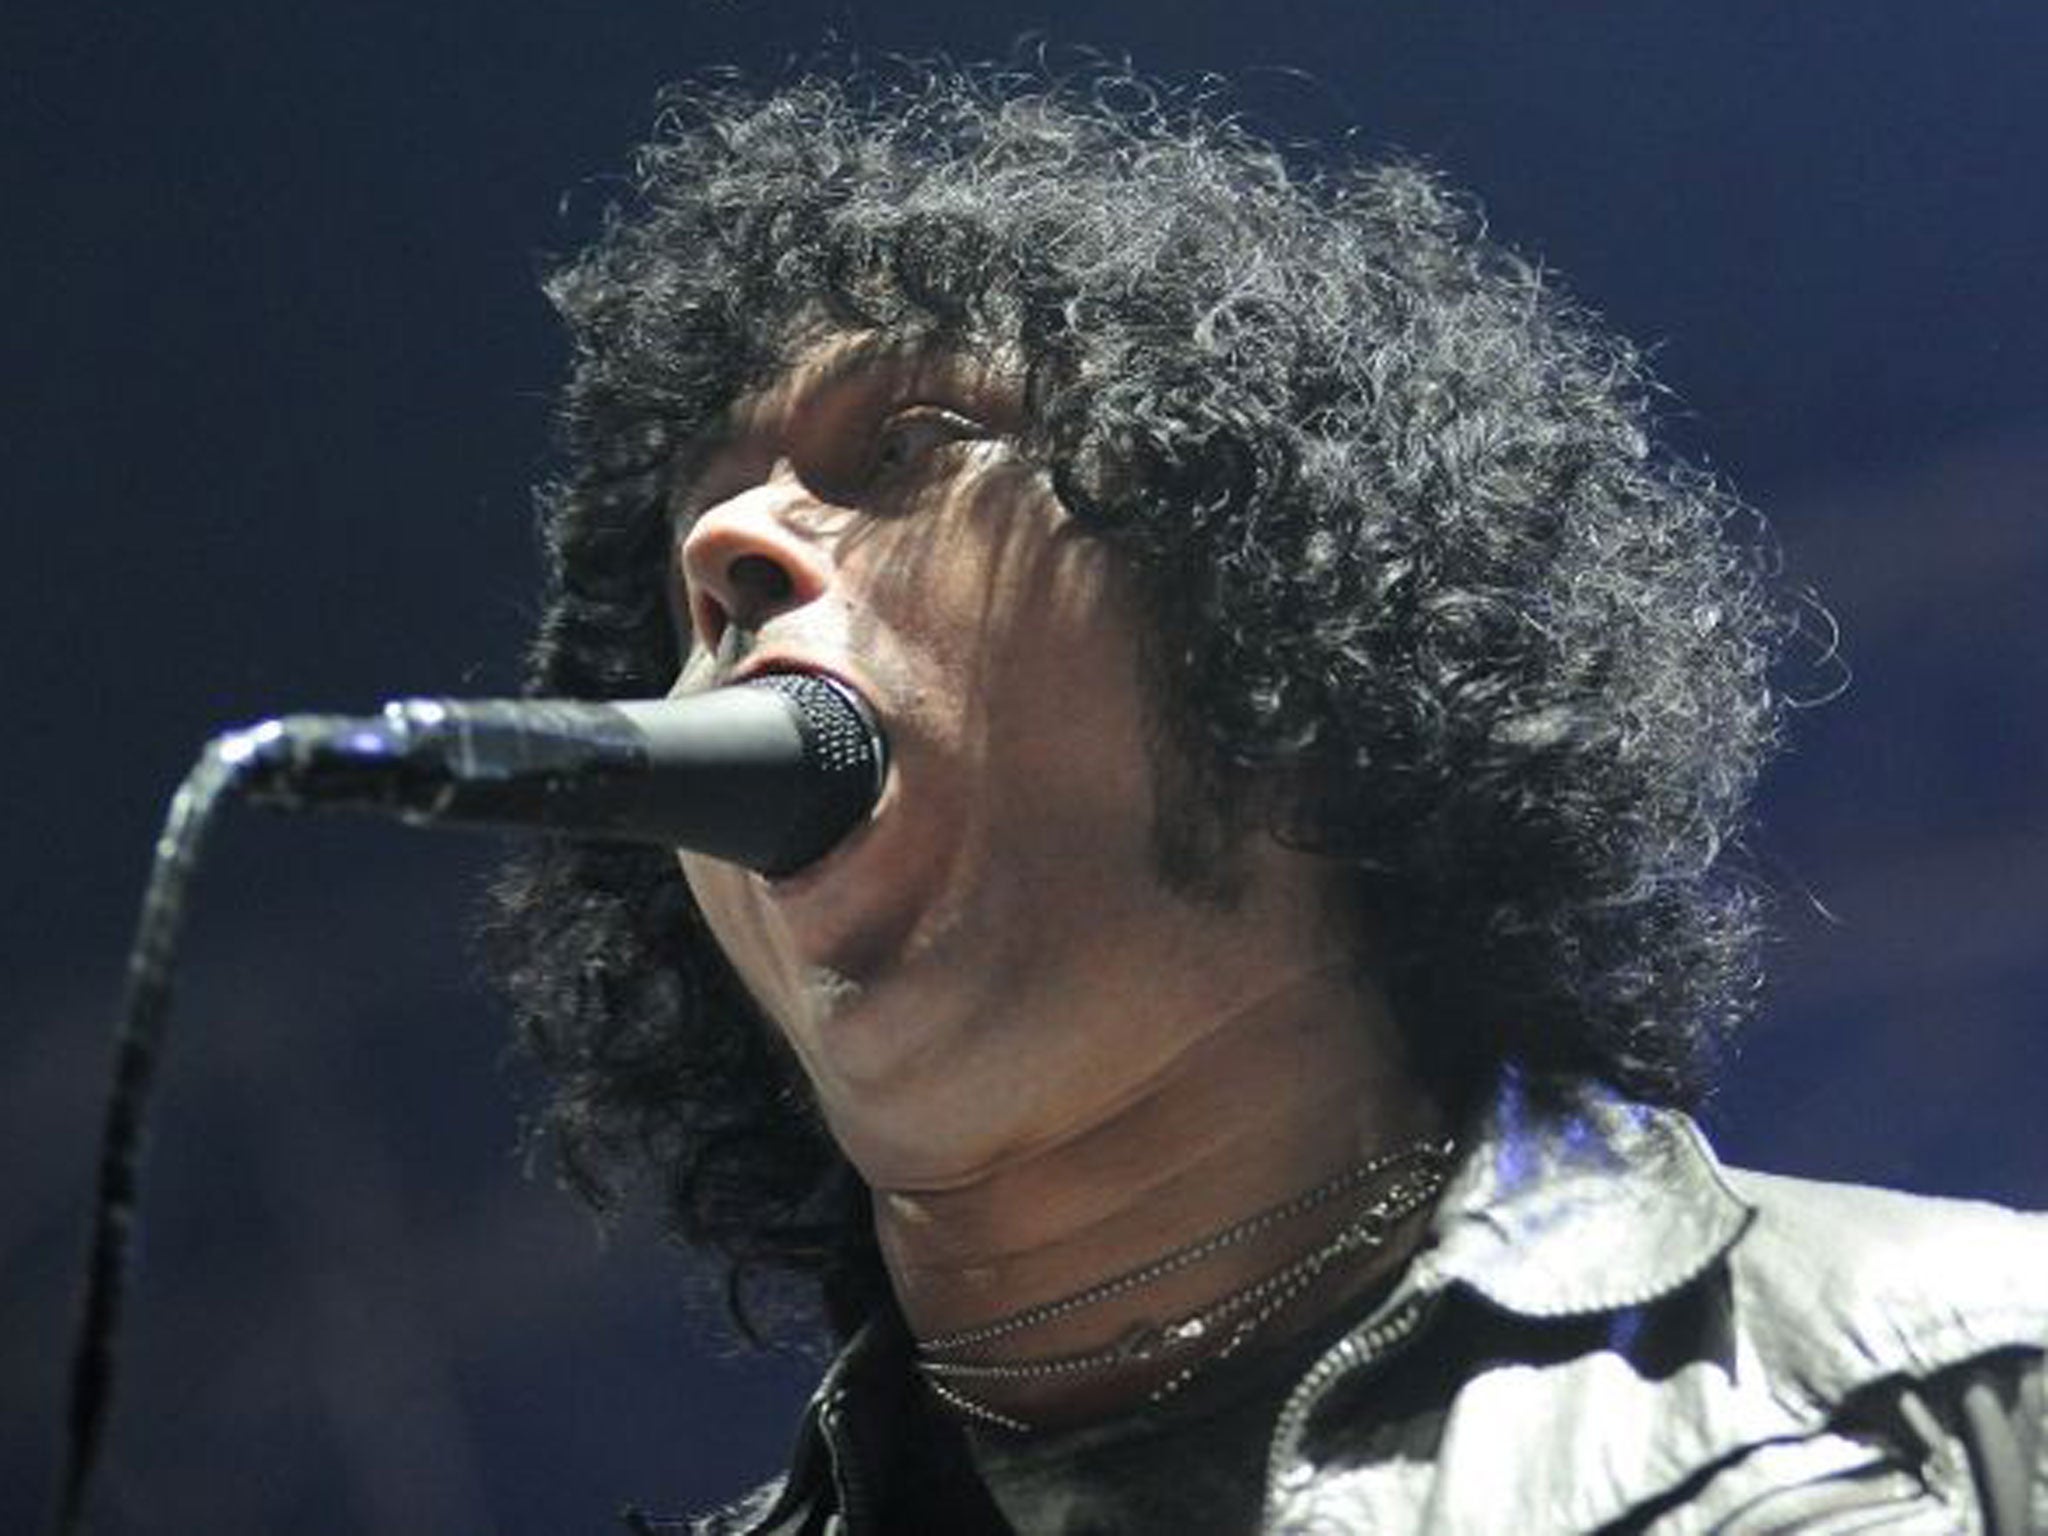 Cedric Bixler-Zavala of At The Drive-In performs on stage at Splendour In The Grass